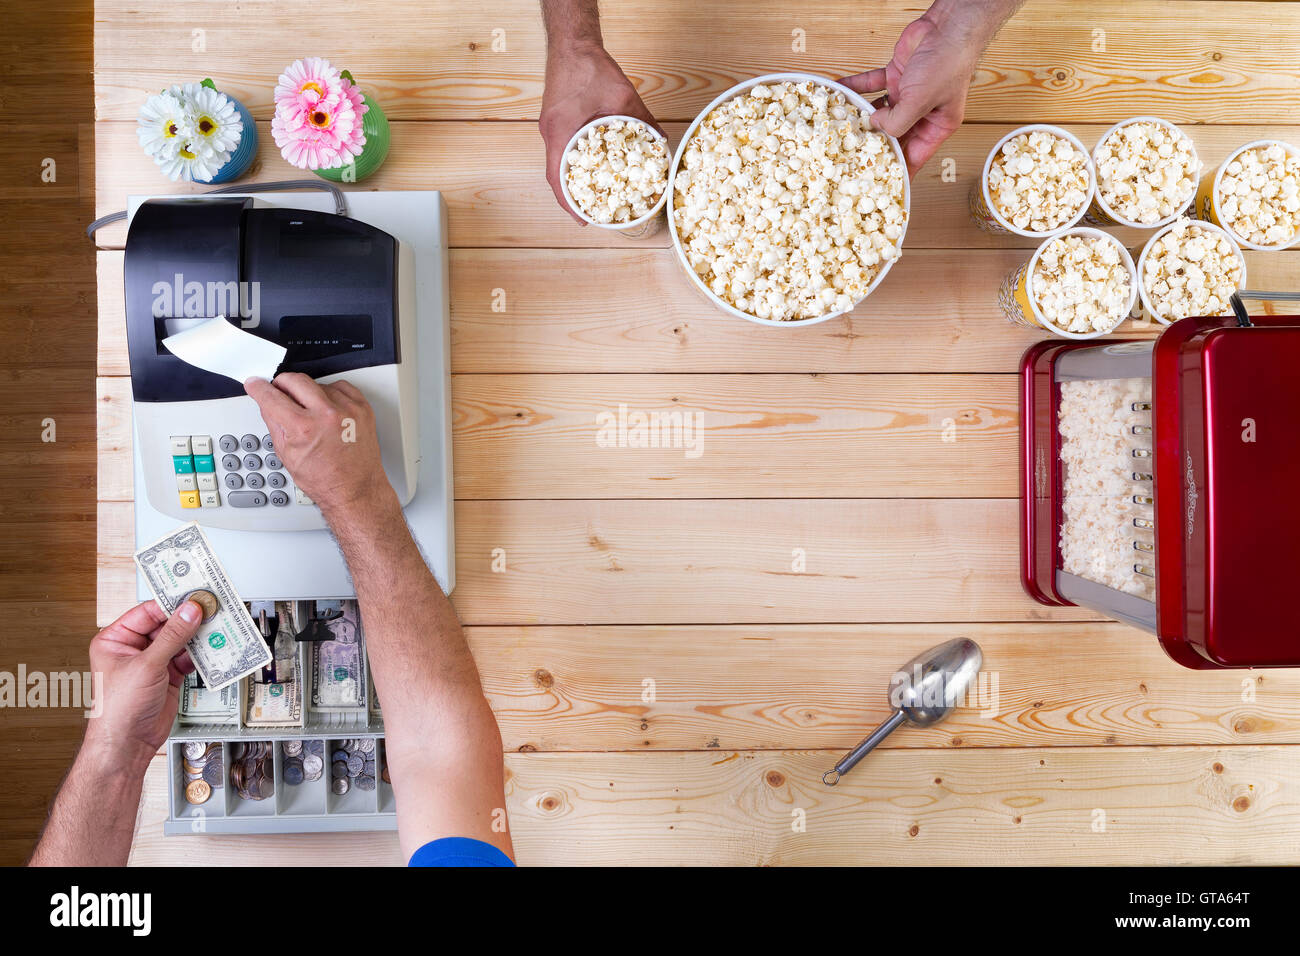 Man selling freshly made bowls of popcorn tendering money at the cash register for a customer, overhead view of their hands and Stock Photo